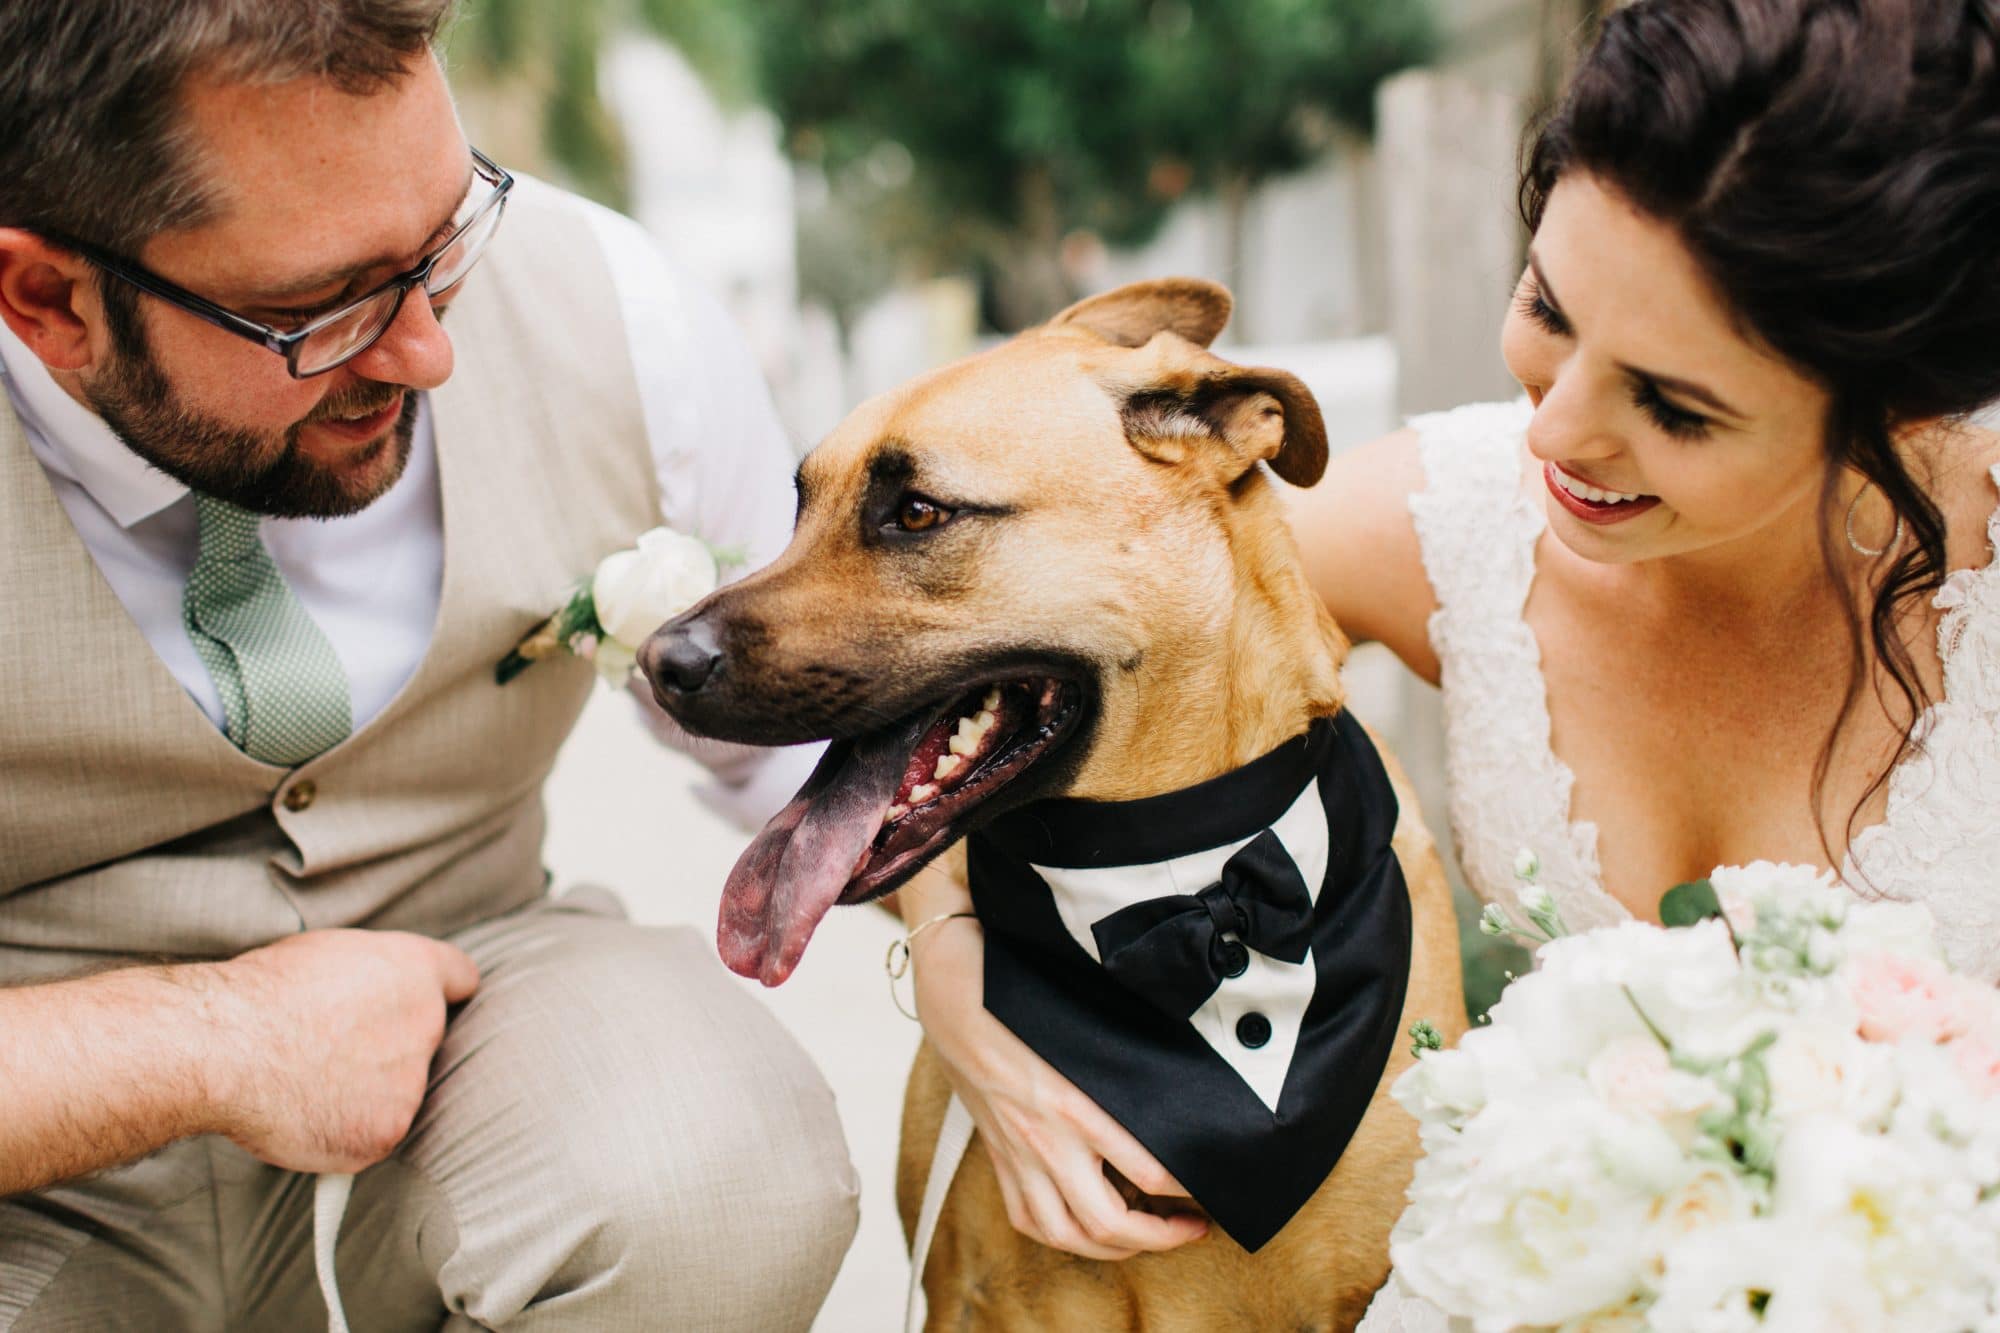 Bride and groom showing love to their dog.